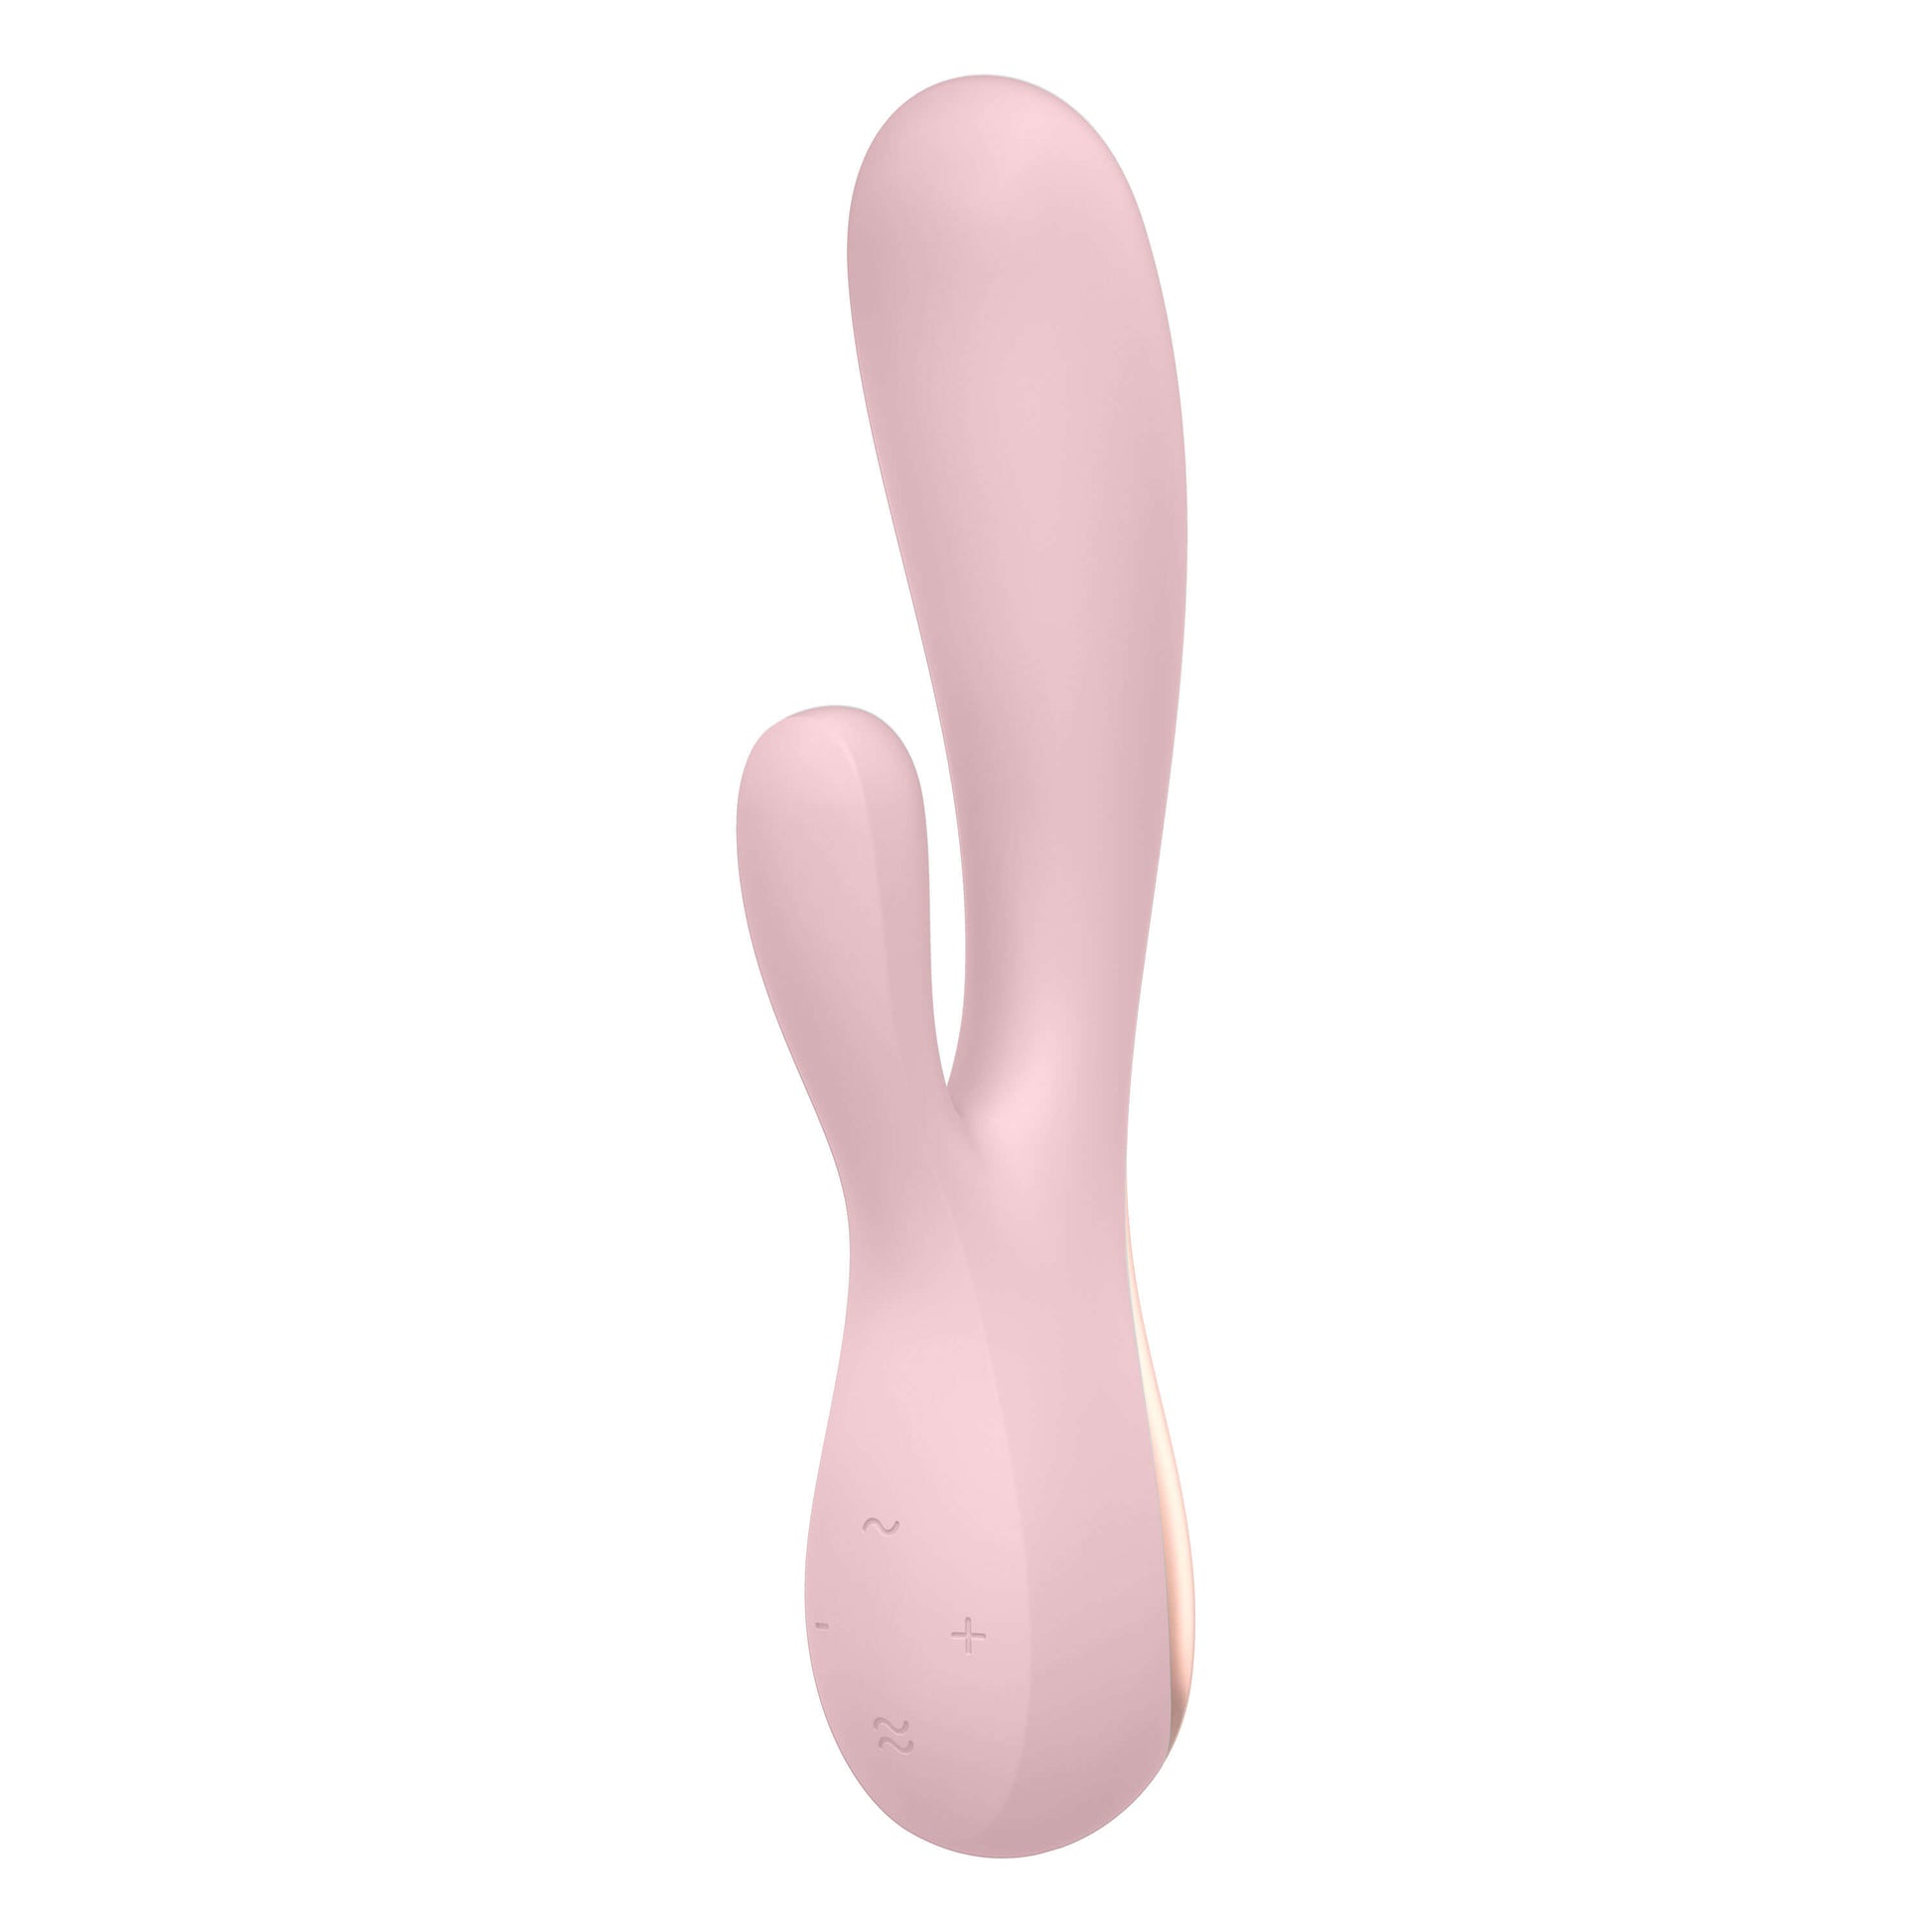 Satisfyer Mono Flex Rabbit Vibrator in Mauve - by The Bigger O - an online sex toy shop. We ship to USA, Canada and the UK.